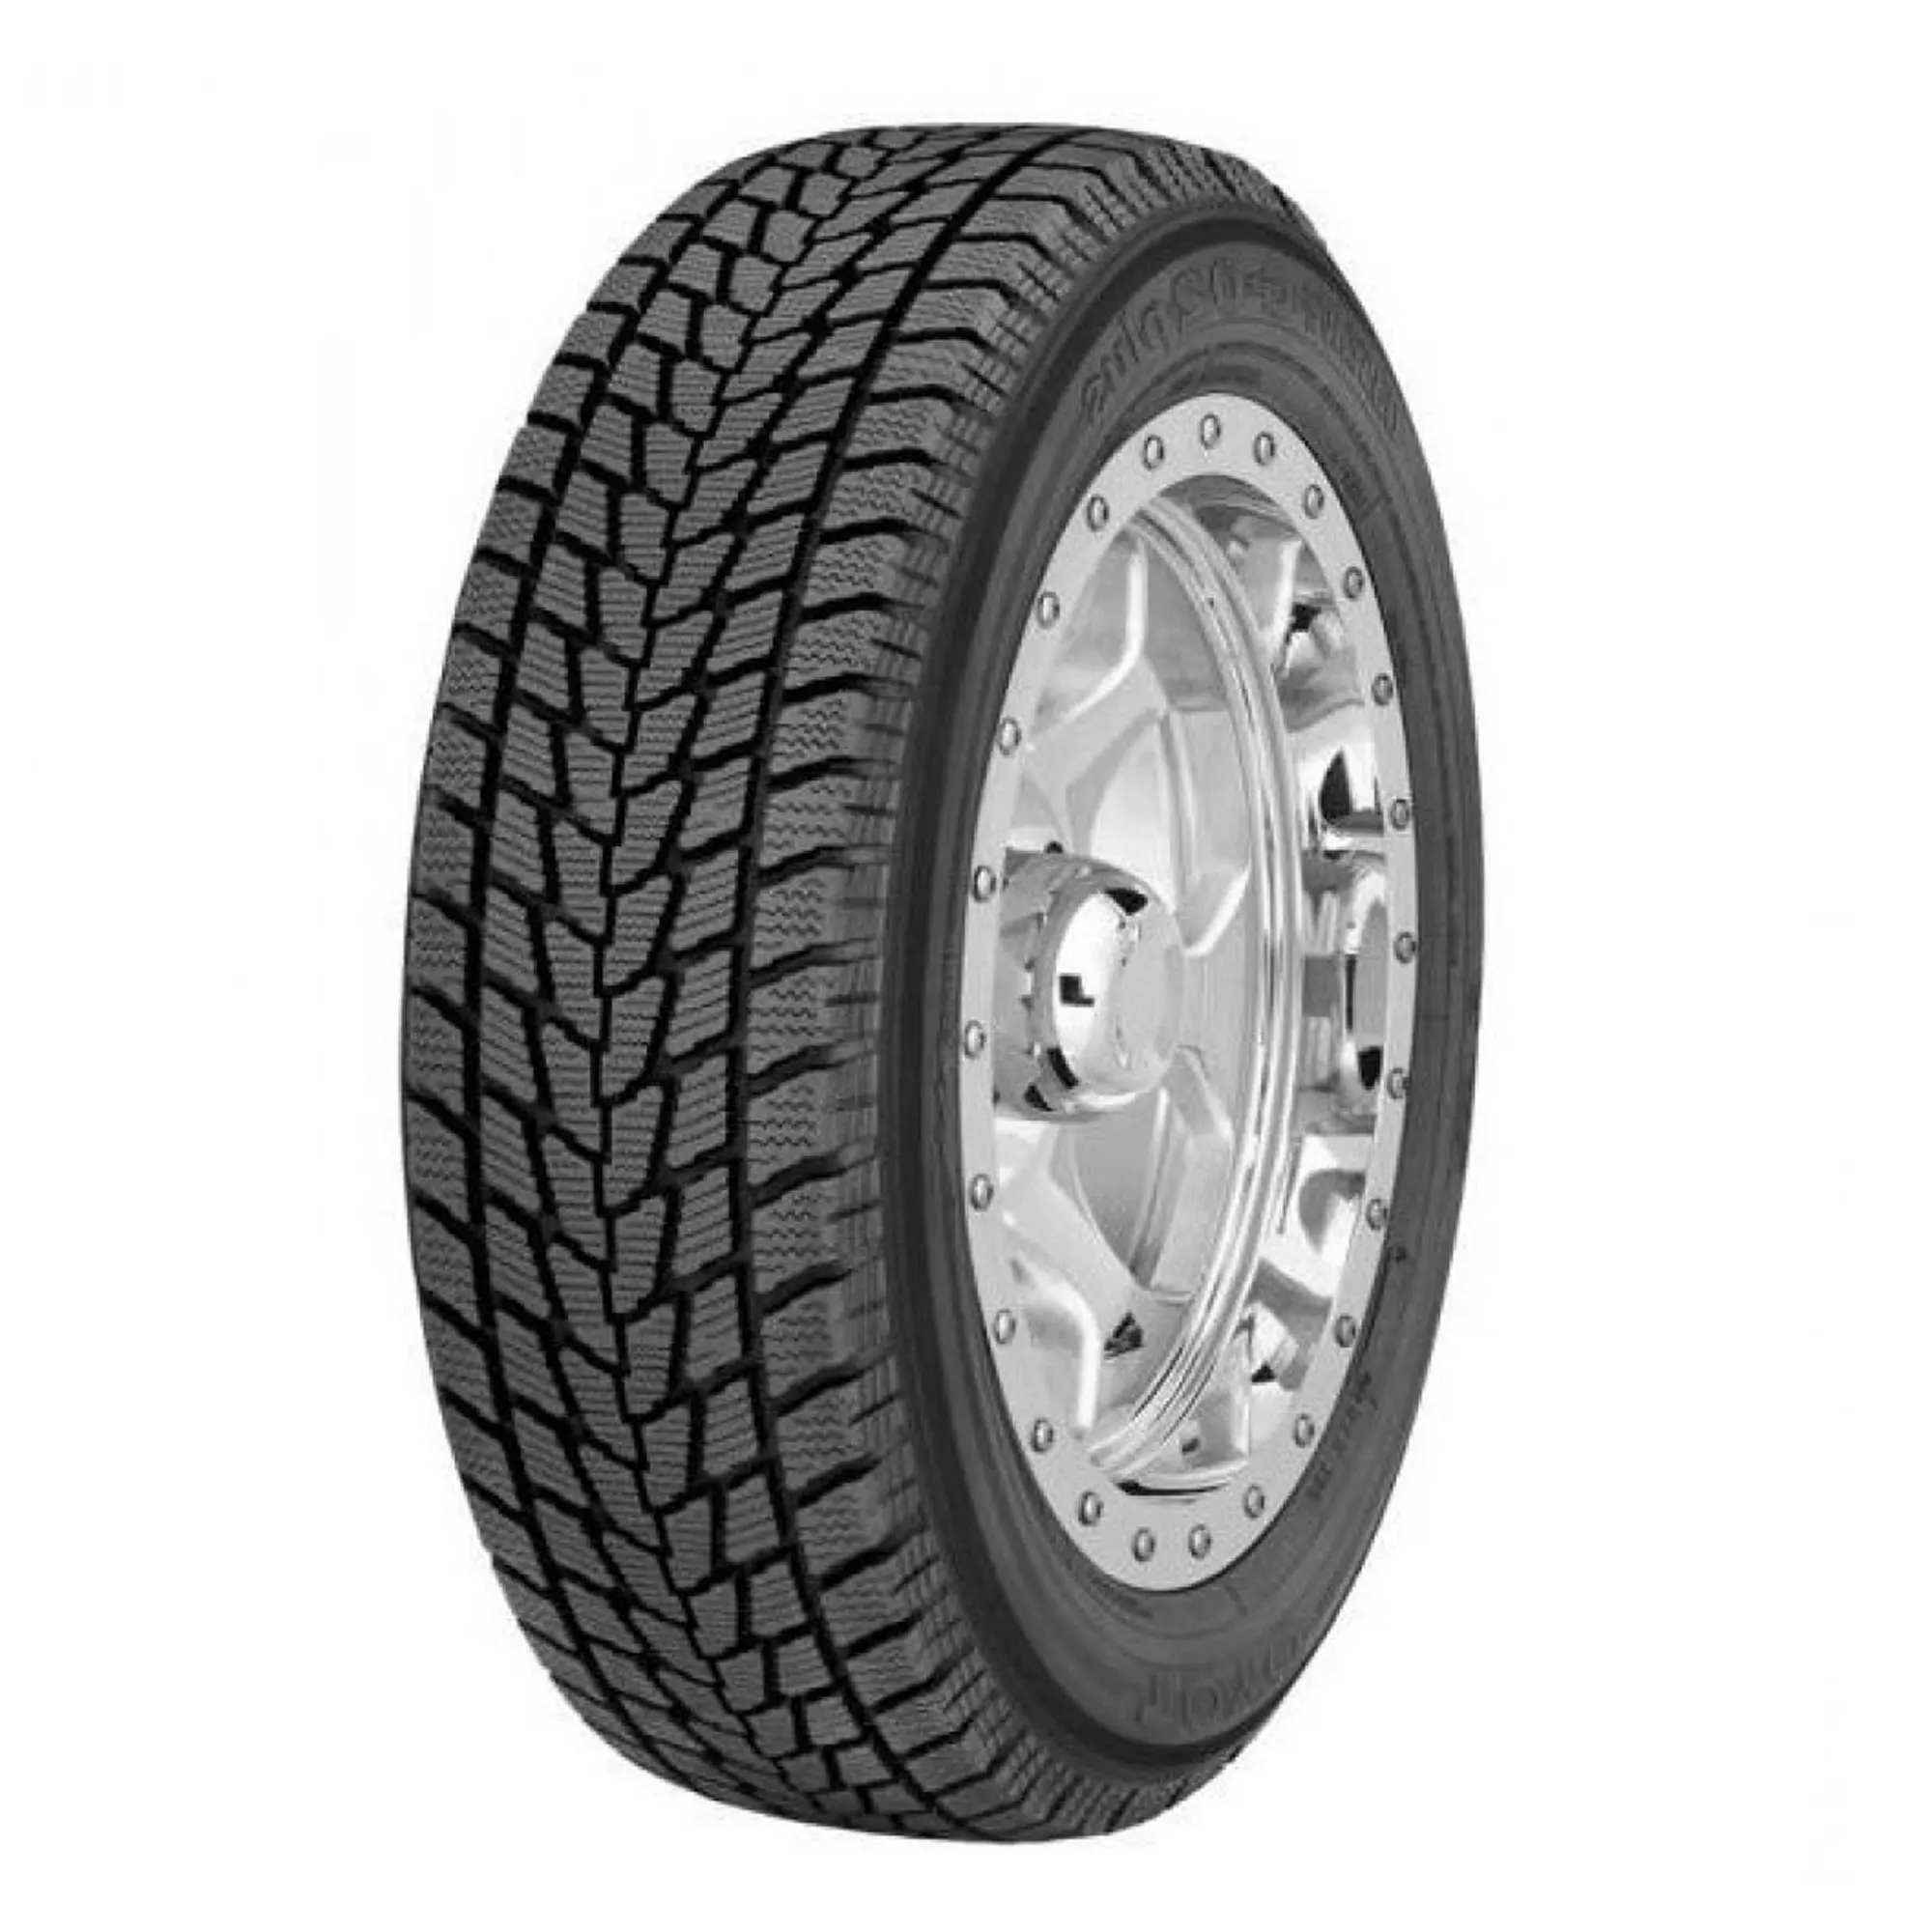 Шина 255/55R19 111H OPEN COUNTRY G-02+